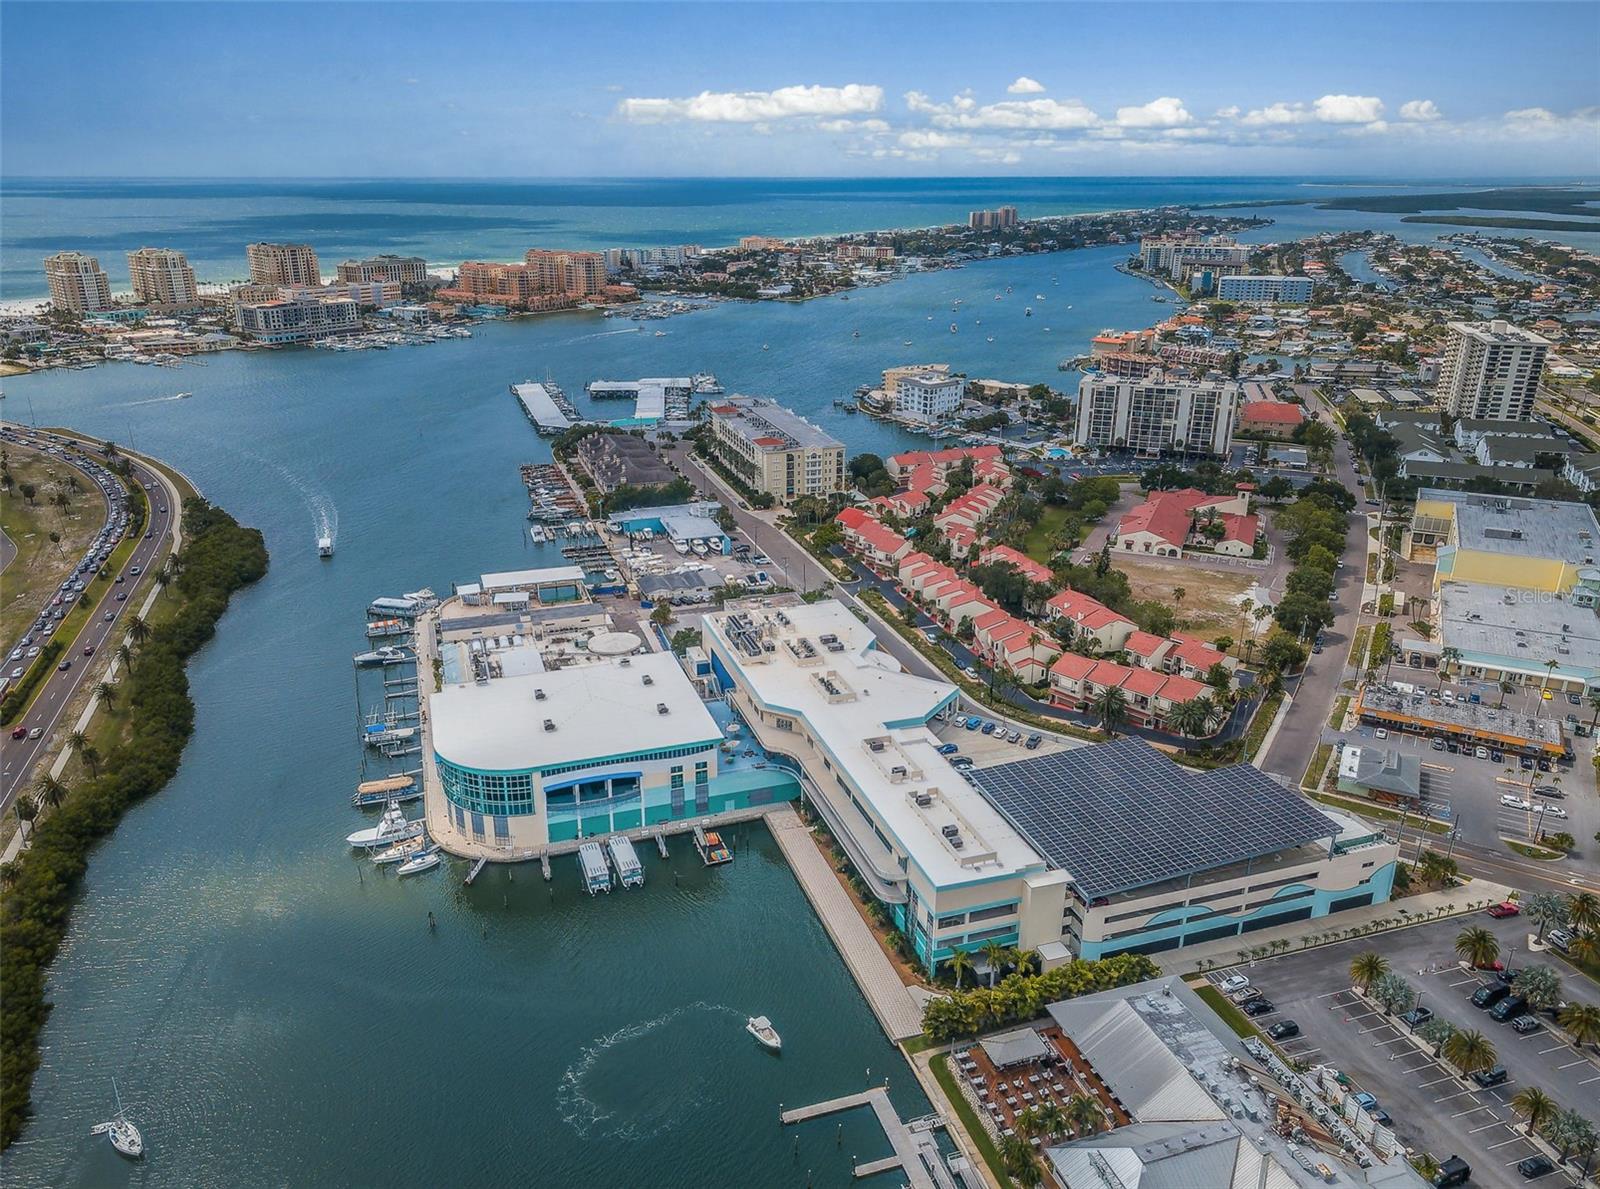 his aerial view is not just a visual treat; it's an invitation to explore, appreciate, and be part of the marine conservation legacy at Clearwater Marine Aquarium.